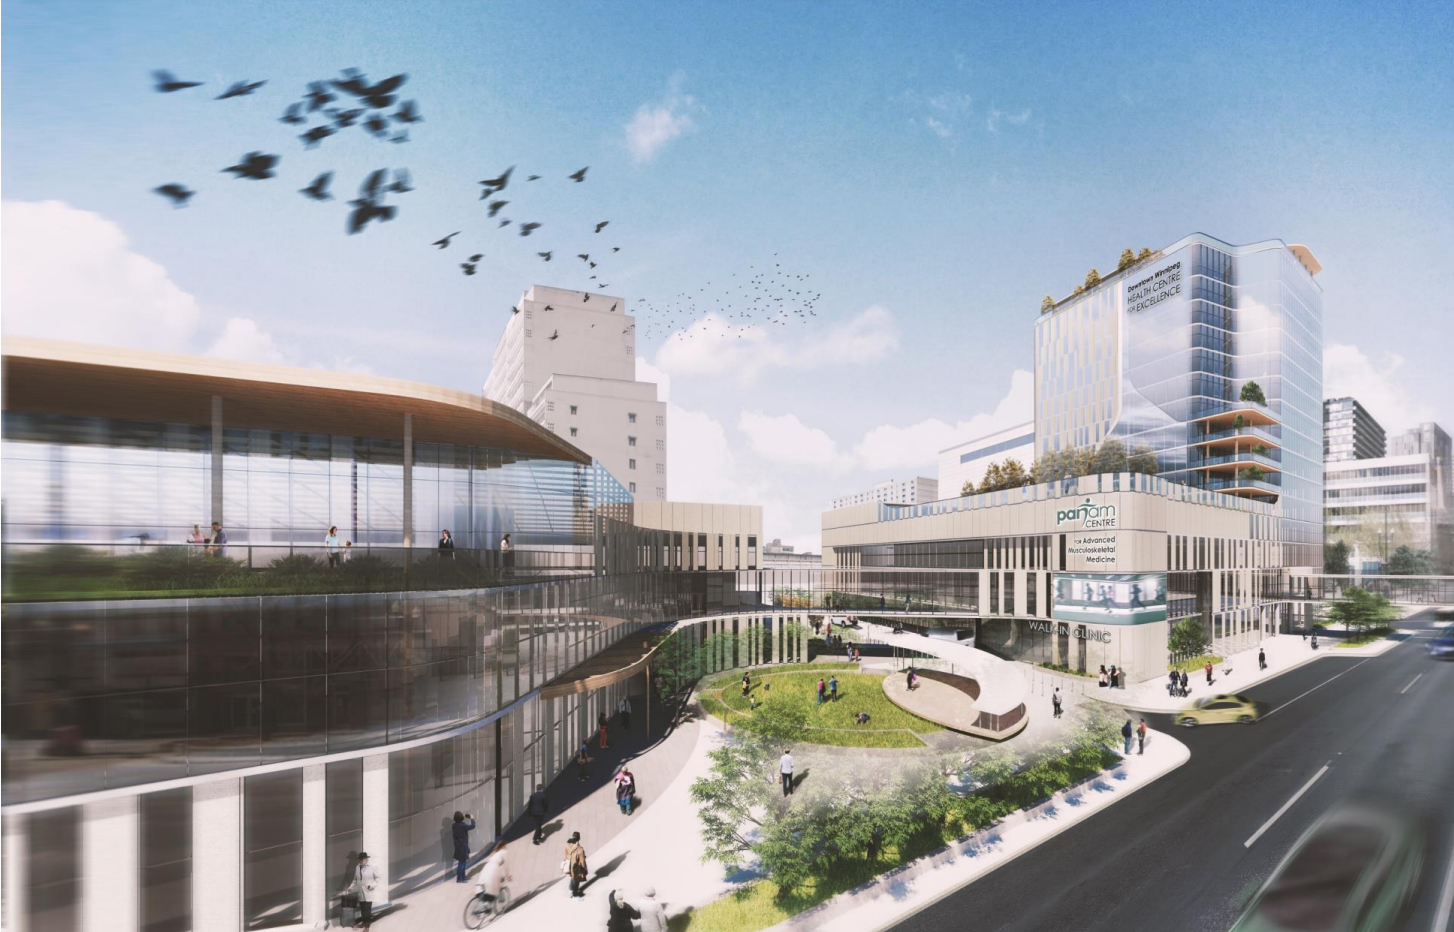 A rendering of the plans for Portage place show a fifteen-storey tower stretching above the current mall space. A new greenway cuts through the property, while more reimagined, multi-use building space can be seen to the left.